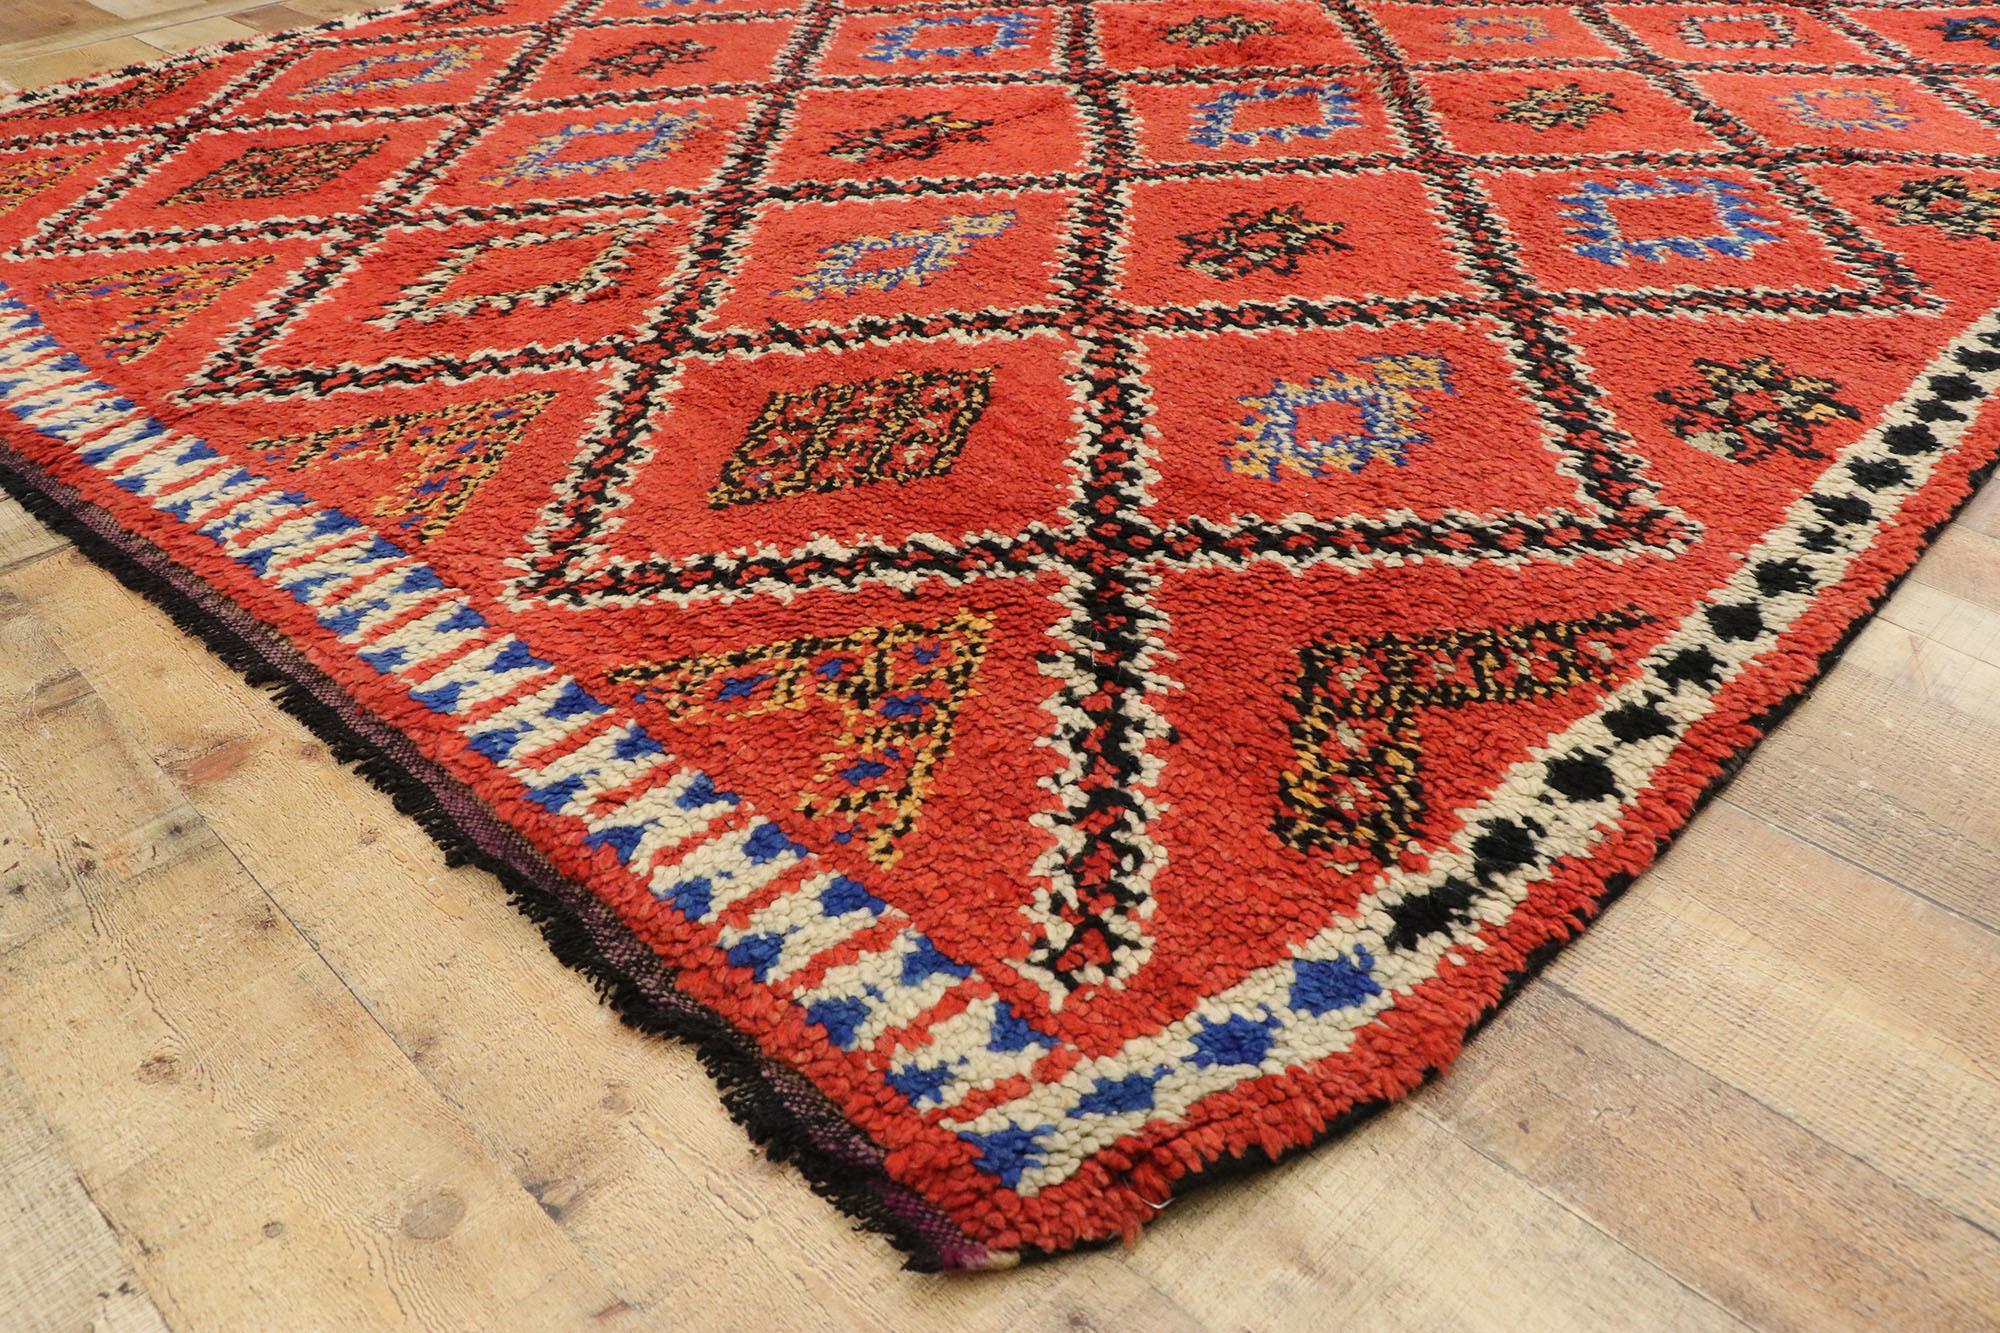 Hand-Knotted Vintage Berber Red Moroccan Rug with Modern Northwestern Tribal Style